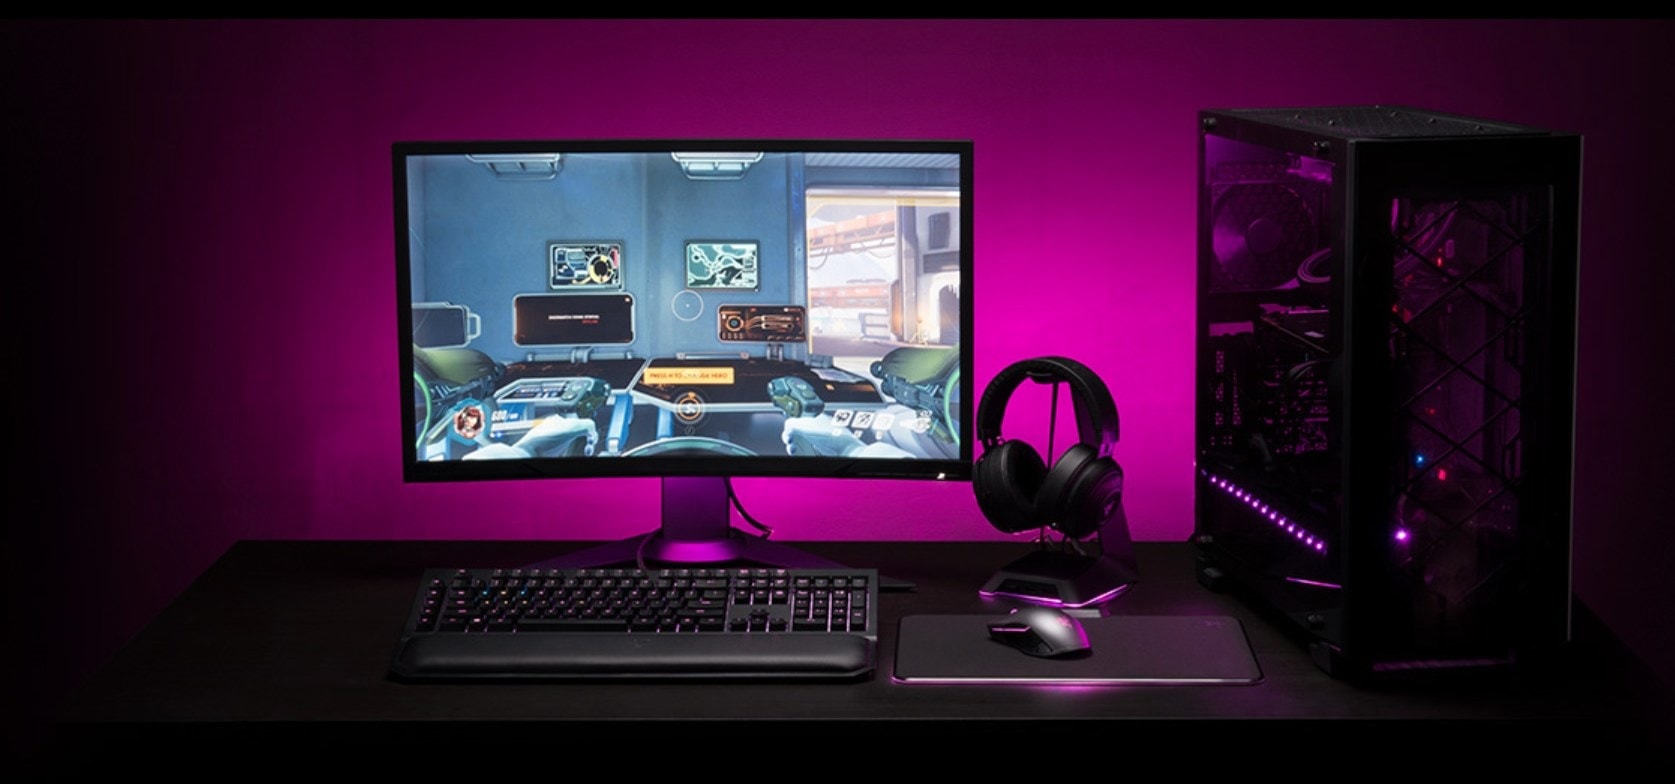 Razer Chroma Lighting support expands – Now supports 25 more brands